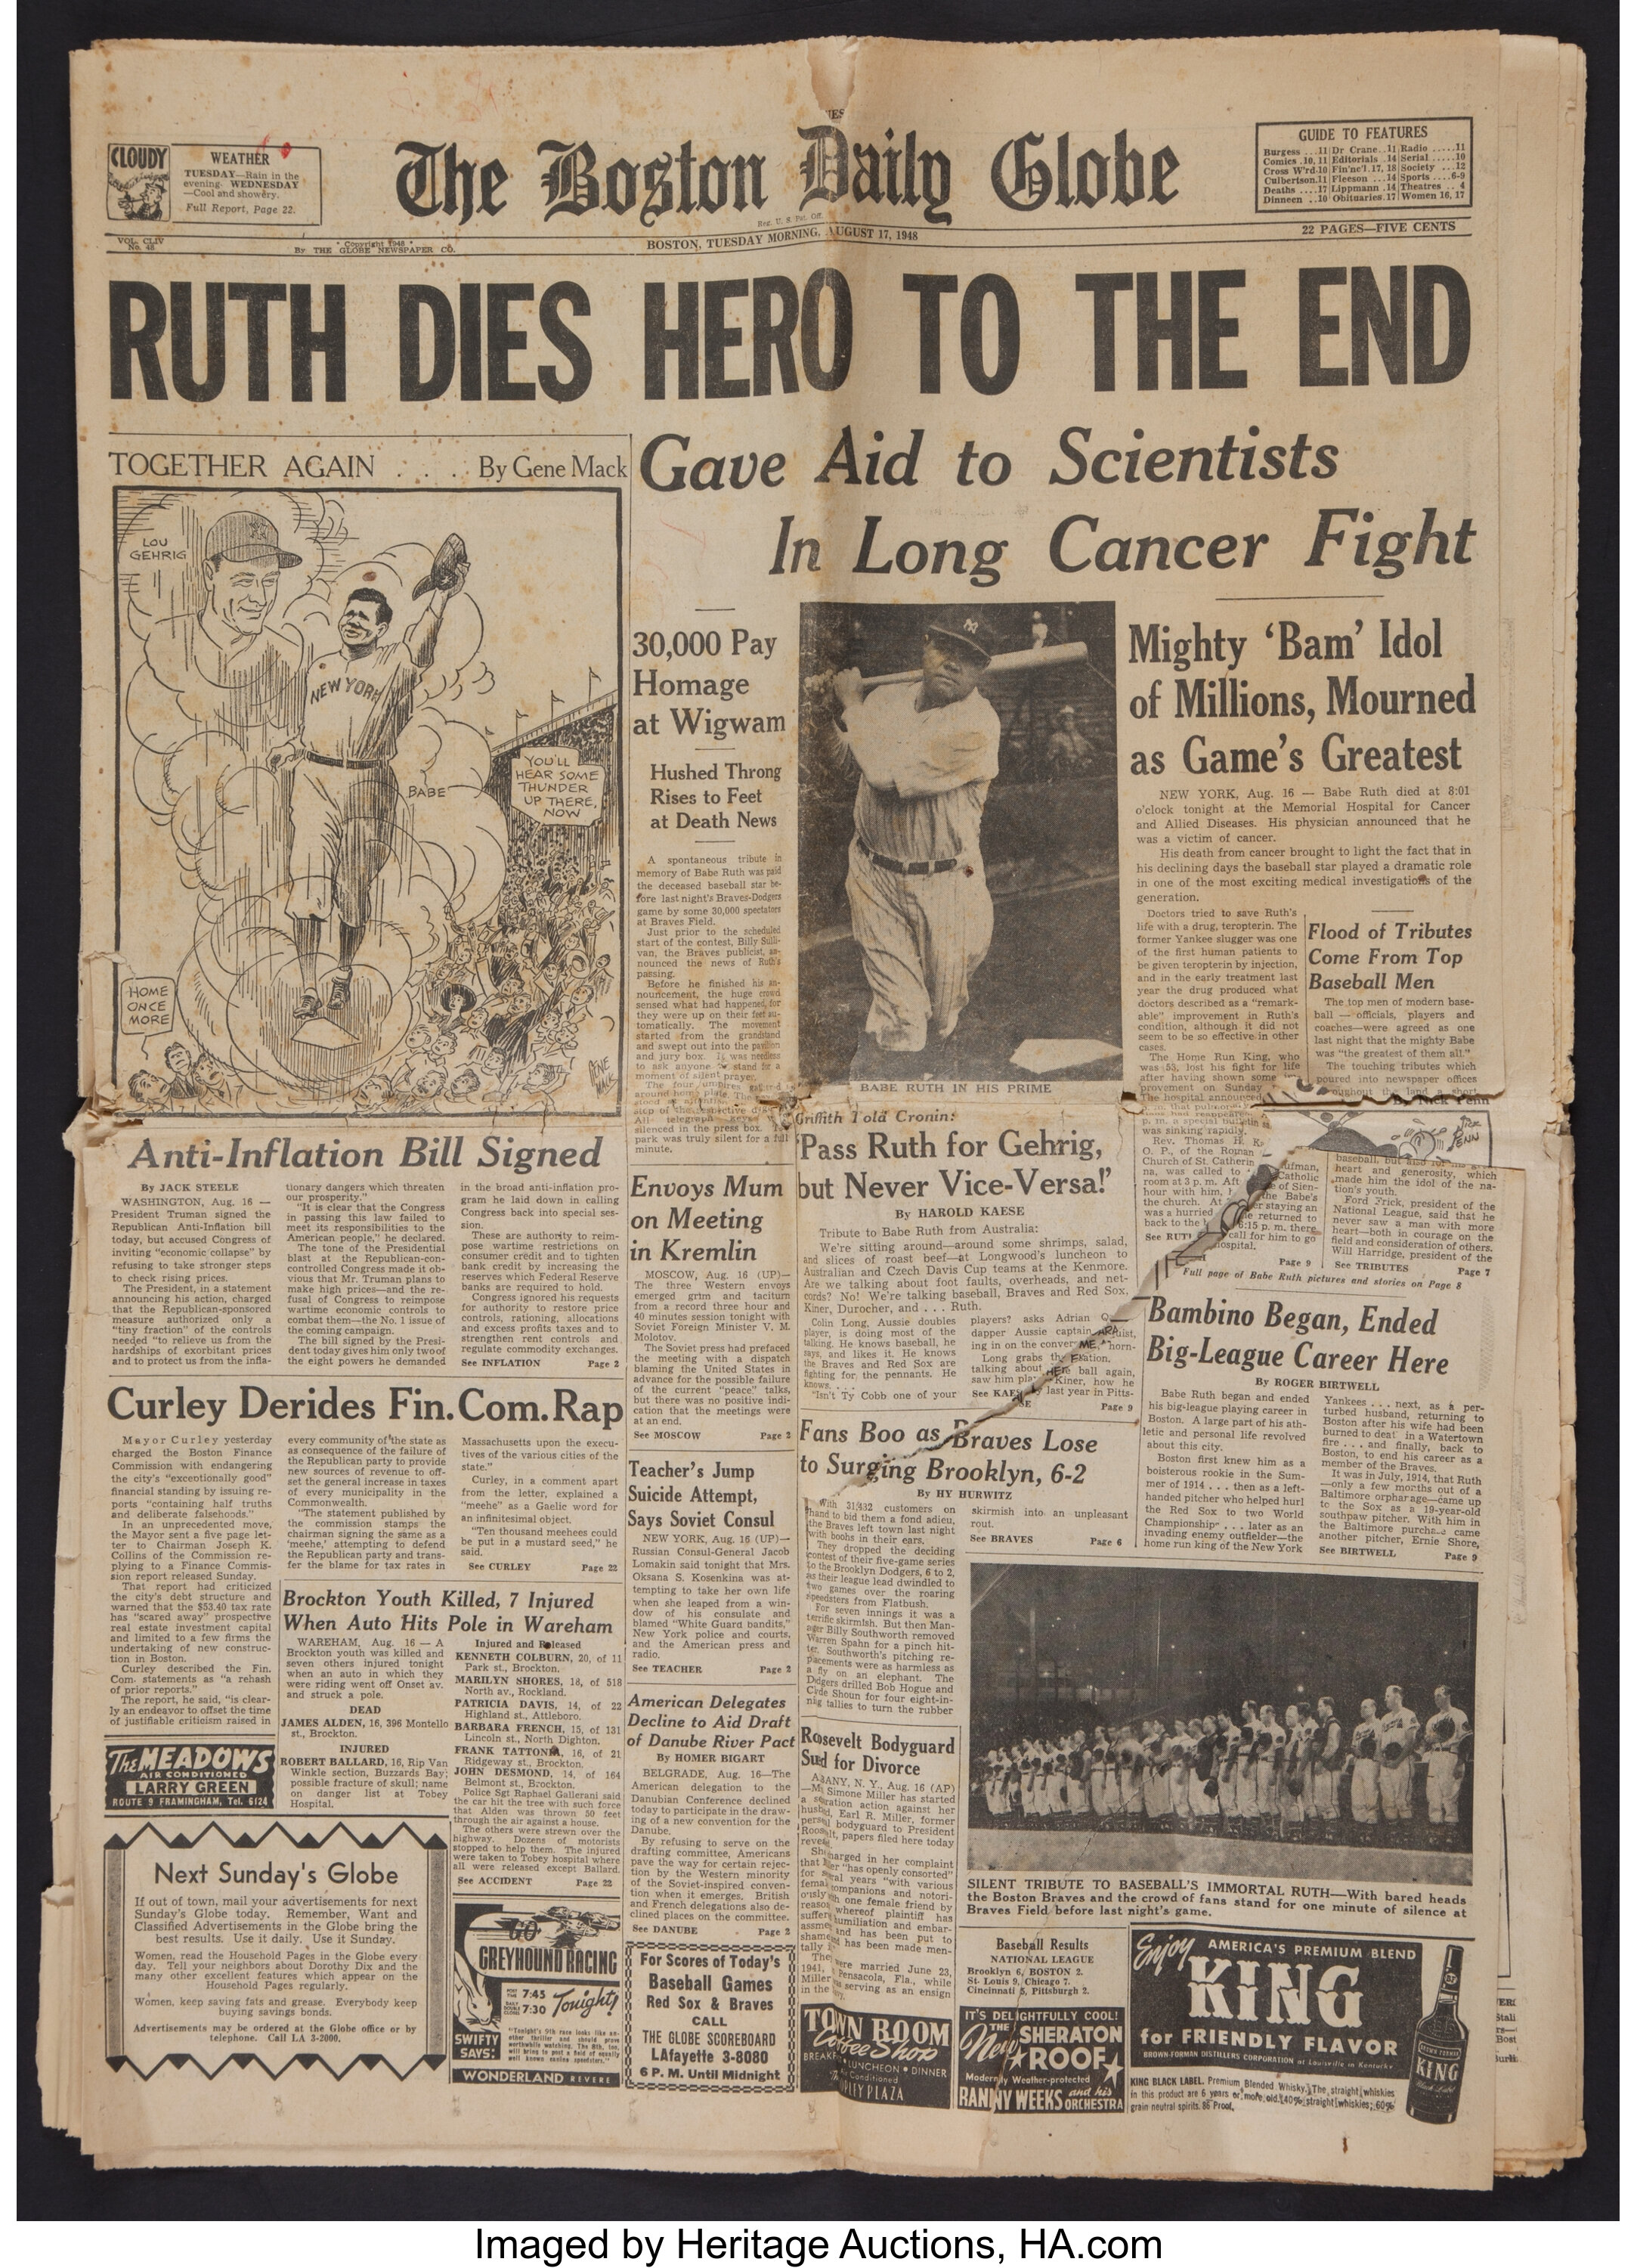 The death of Babe Ruth, as told by the headlines of the day 